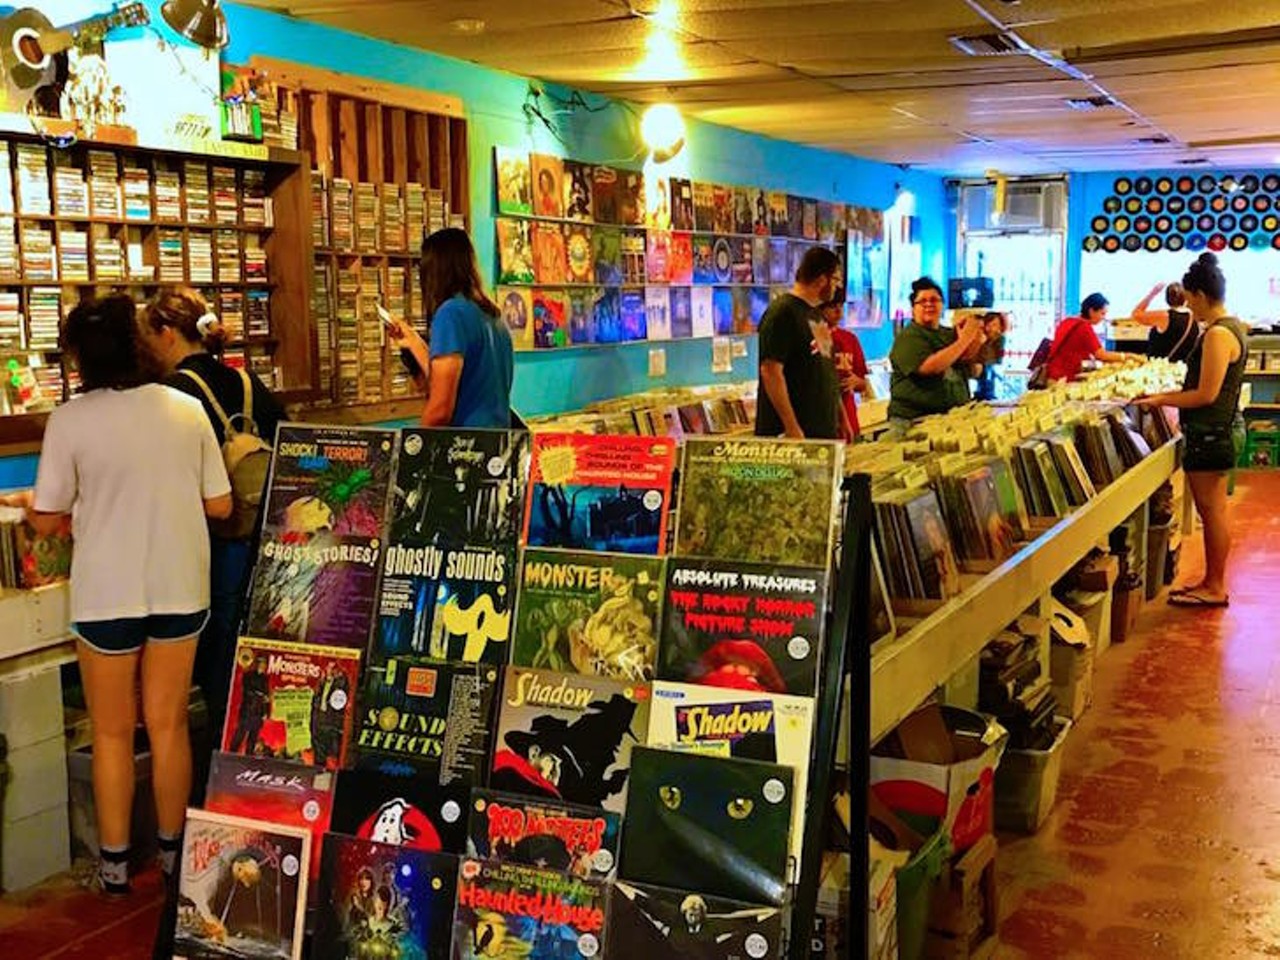 Atlantic Sounds Record Shop  
138 W. International Speedway Blvd., Daytona Beach
This 37-year-old record store has something for everyone. Come away with an album or cassette that you didn&#146;t know you needed, but have to own &#150; like for instance, the vintage album of cat sounds we may or may not have purchased.
Photo via Atlantic Sounds/Facebook